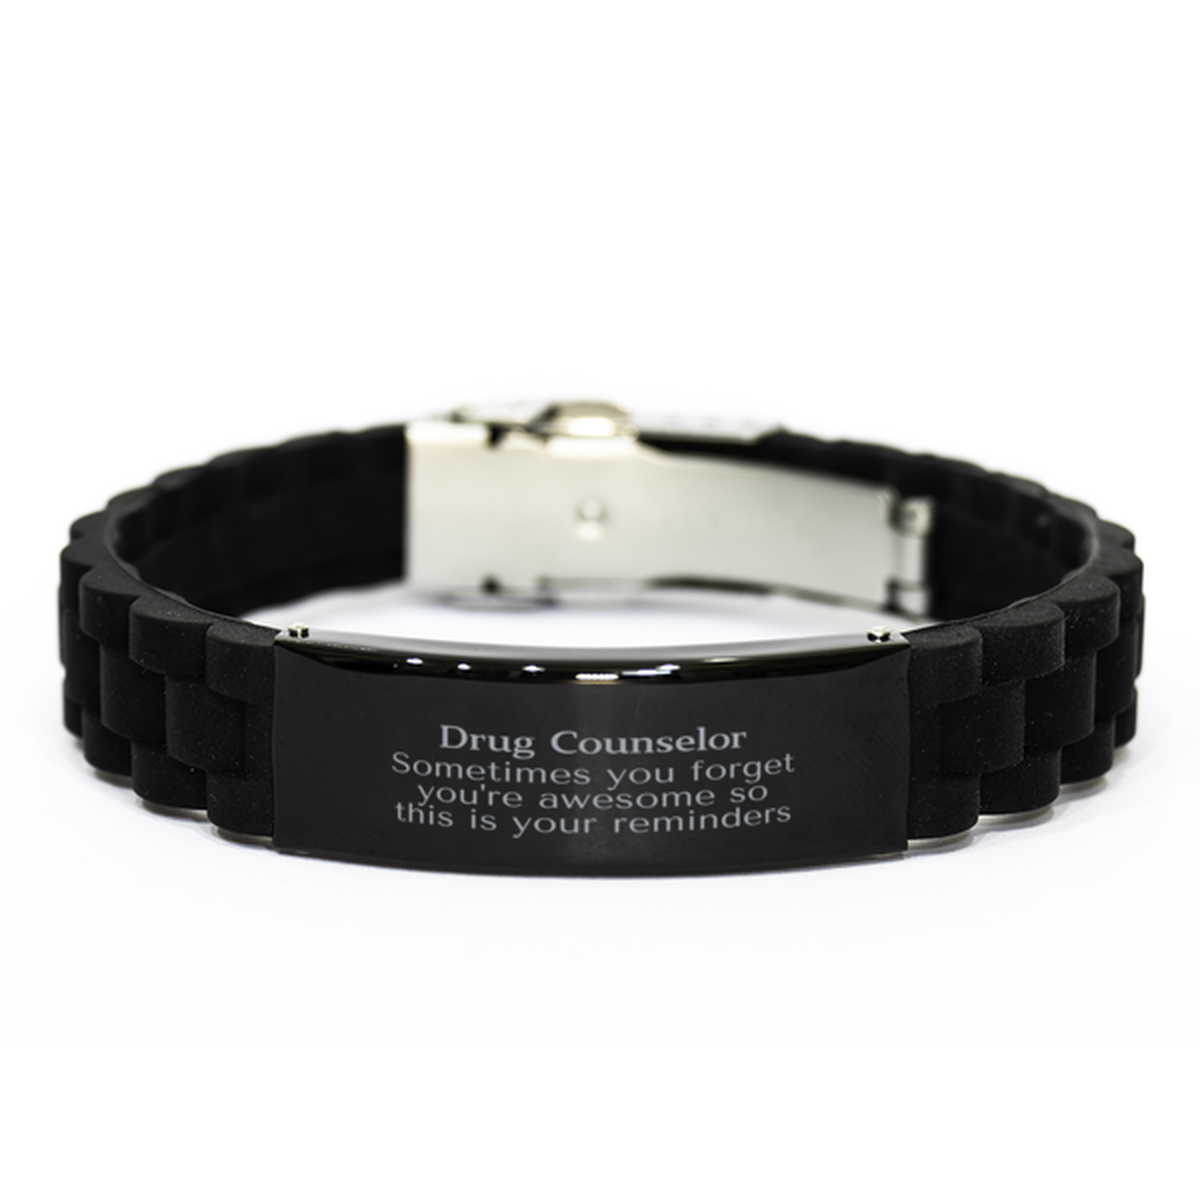 Sentimental Drug Counselor Black Glidelock Clasp Bracelet, Drug Counselor Sometimes you forget you're awesome so this is your reminders, Graduation Christmas Birthday Gifts for Drug Counselor, Men, Women, Coworkers